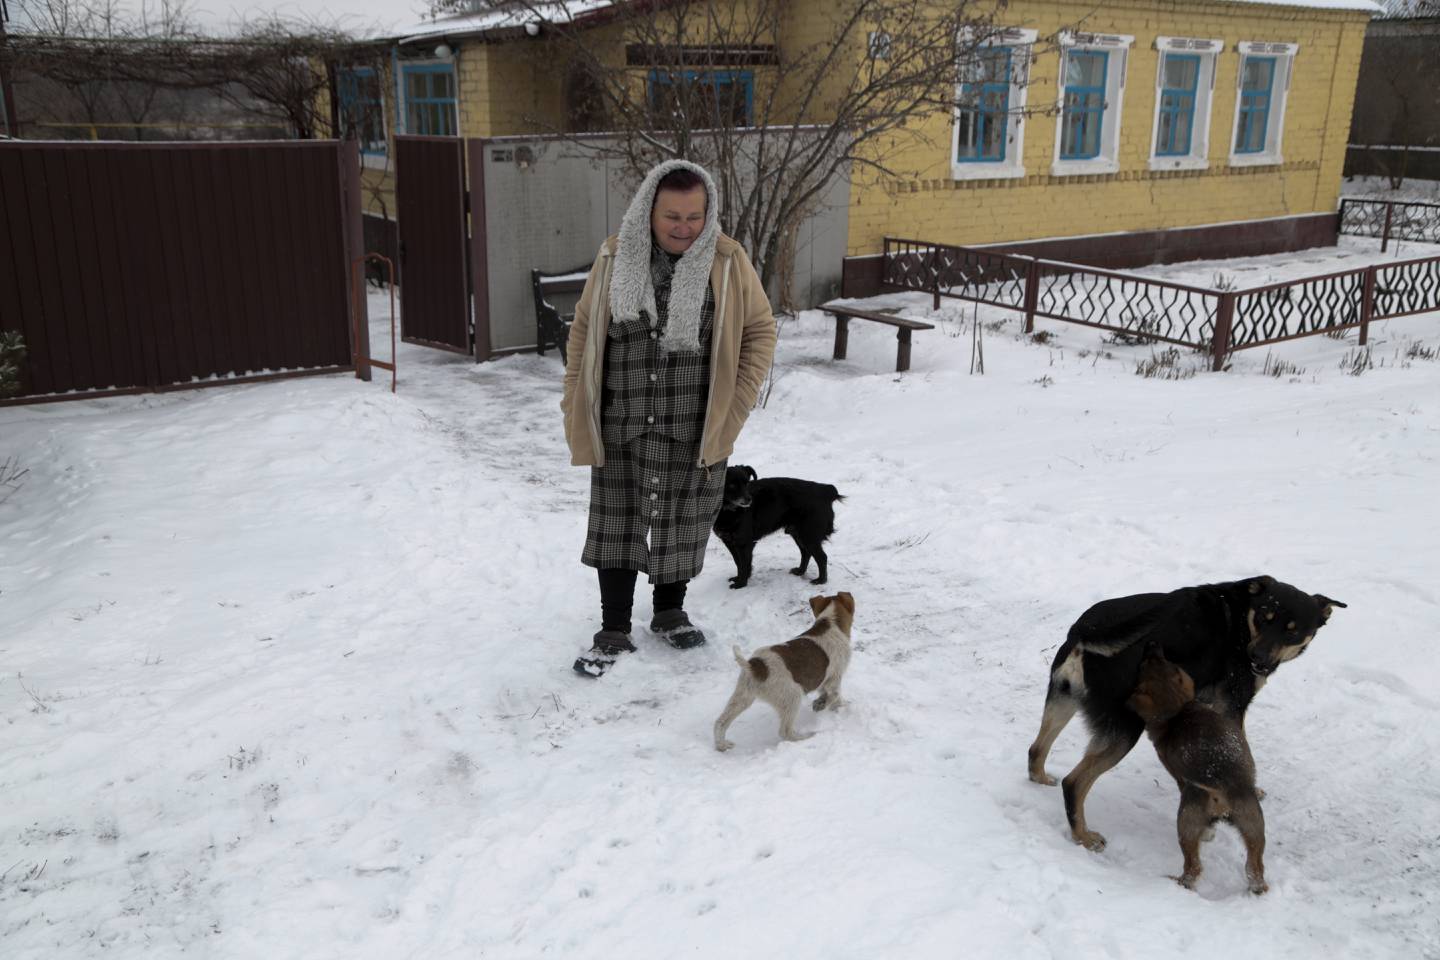 FILE - A woman walks with her dogs on the territory controlled by pro-Russian militants near frontline with Ukrainian government forces in Slavyanoserbsk, Luhansk region, eastern Ukraine, Jan. 25, 2022. Soldiers and civilians in eastern Ukraine are waiting with helpless anticipation to see if war comes. They understand that the decision will be made by people who know little about the lives of those on the eastern front lines. (AP Photo/Alexei Alexandrov, file)